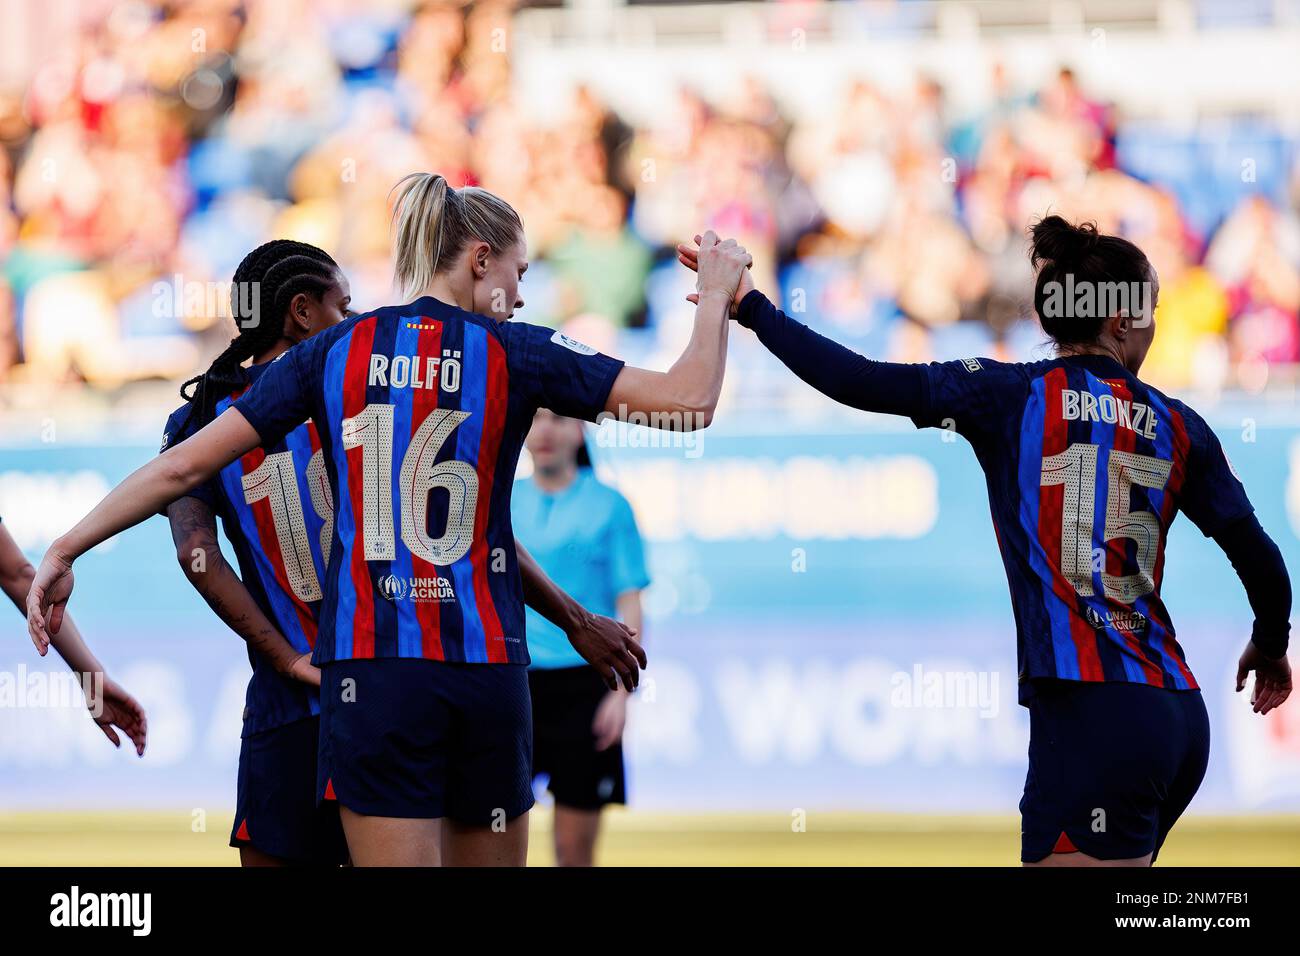 BARCELONA - FEB 6: Rolfo celebrates after scoring a goal during the Primera Division Femenina League match between FC Barcelona and Real Betis Balompi Stock Photo